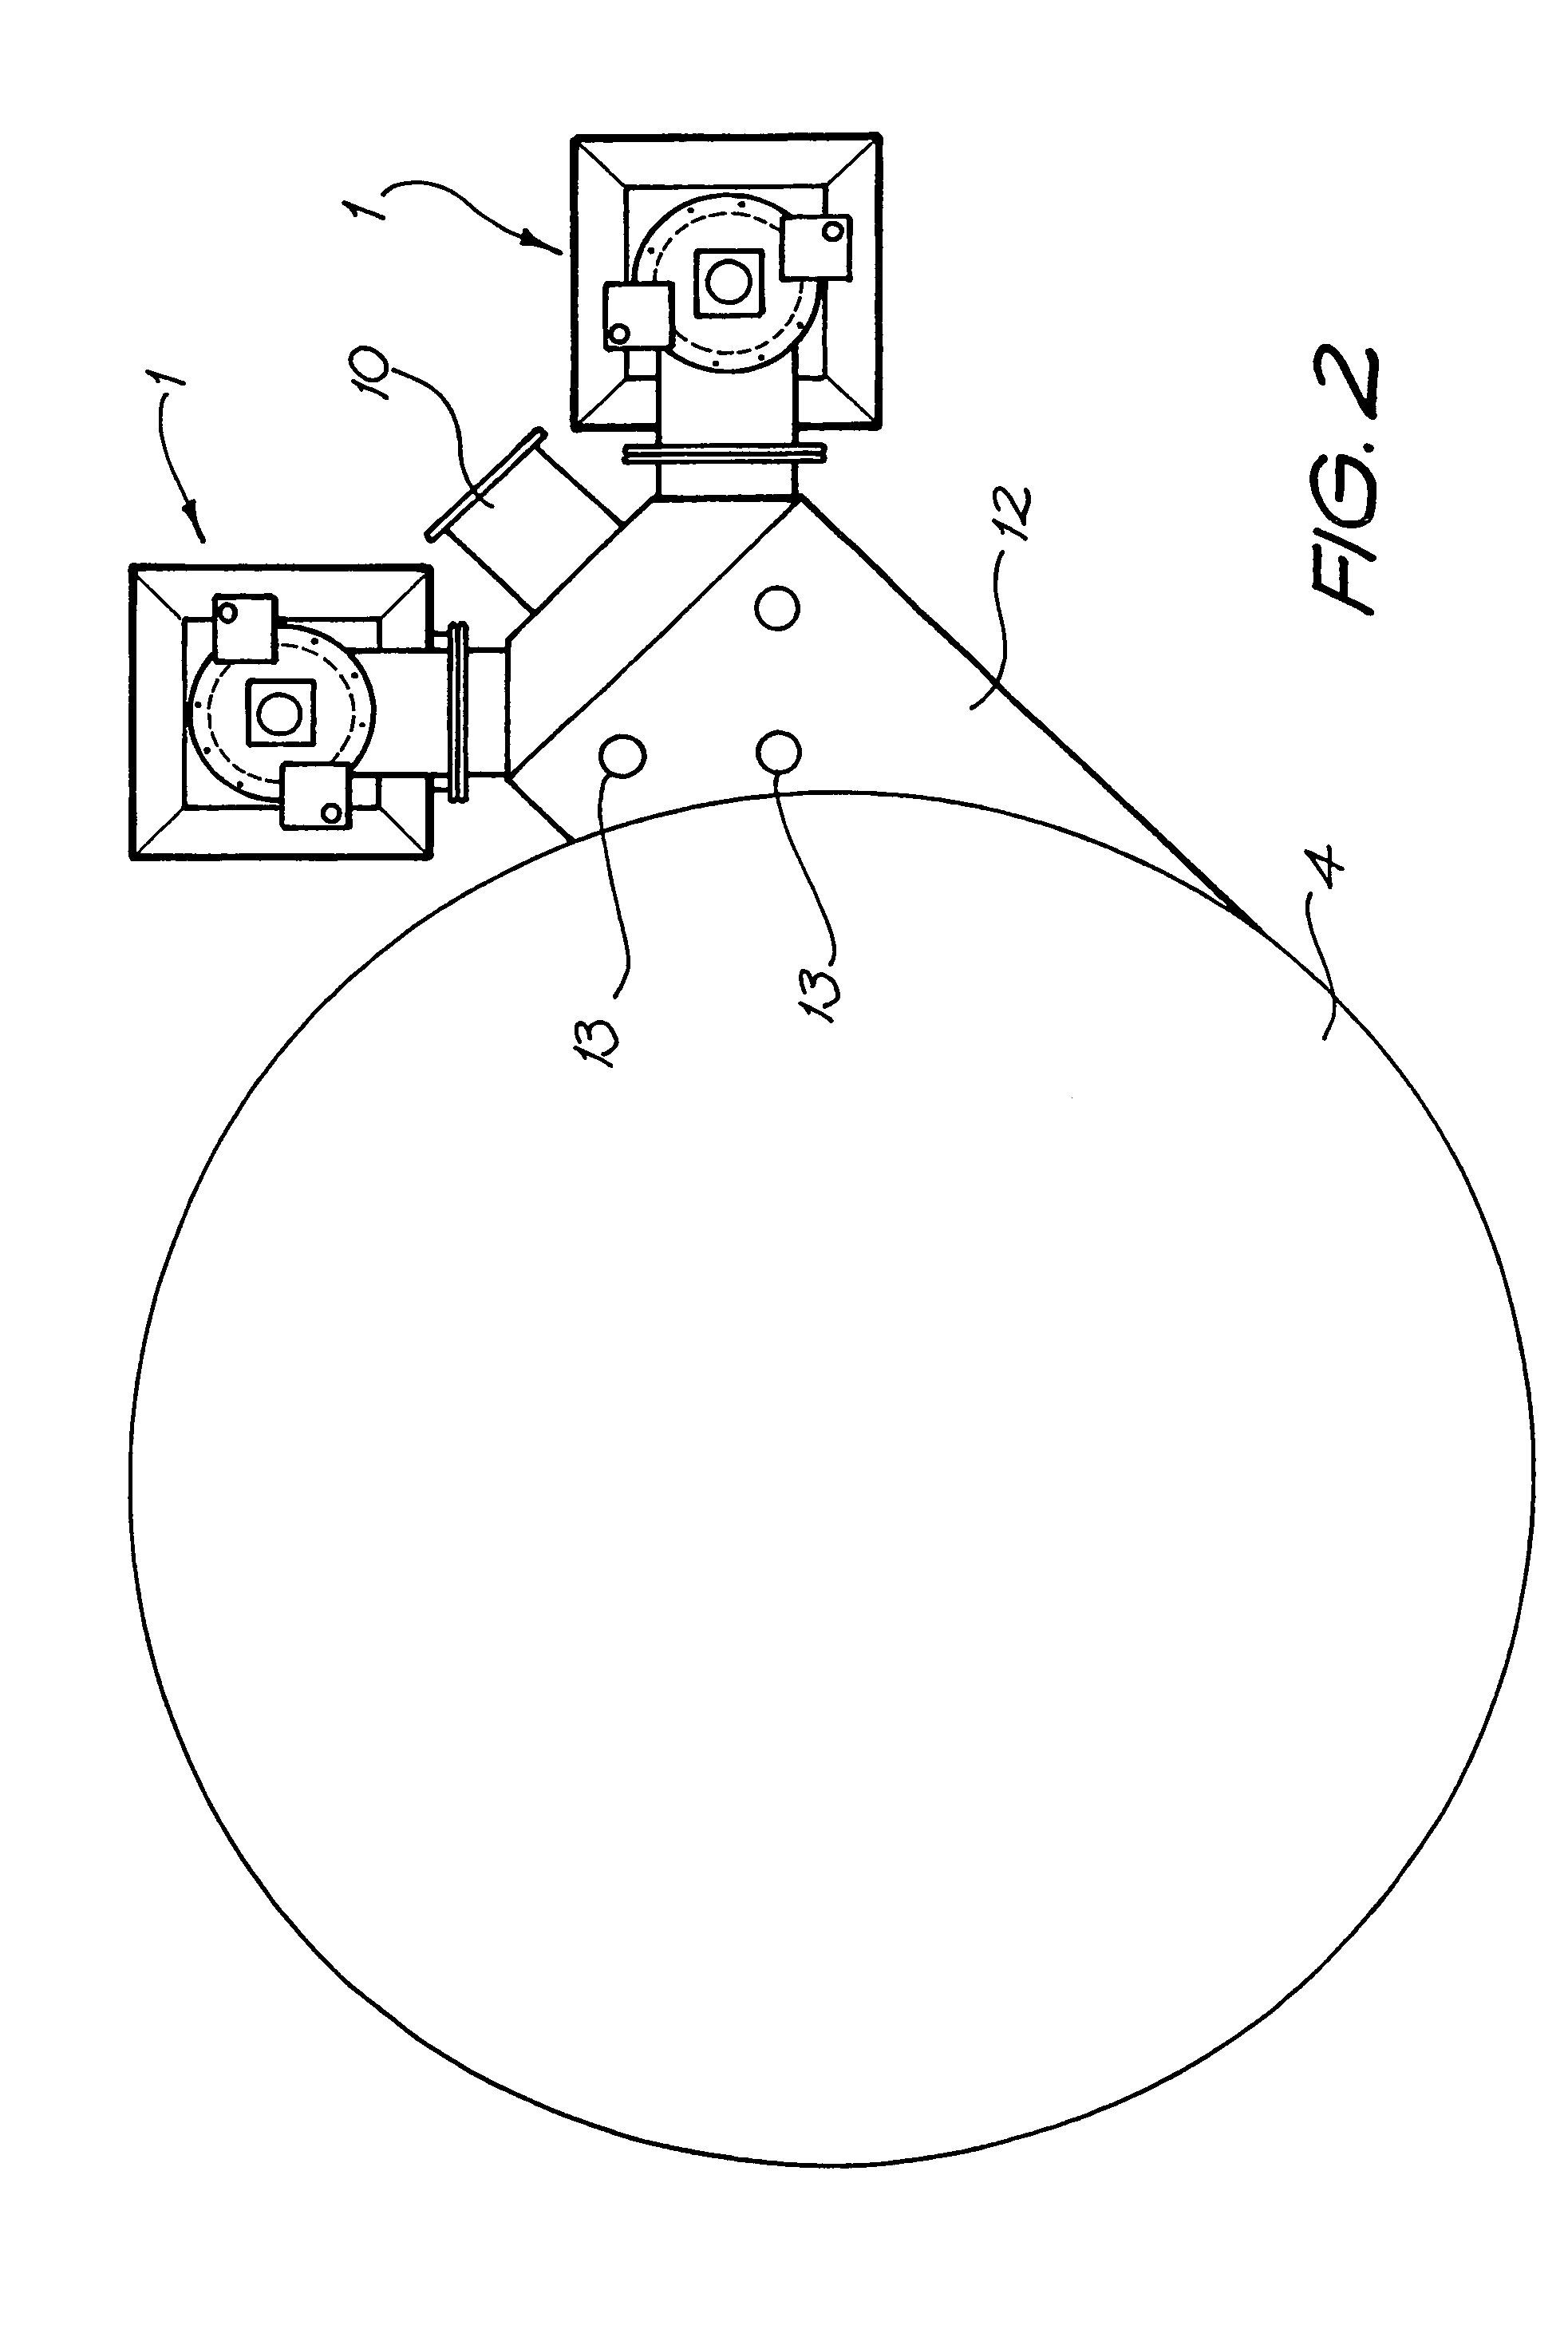 Dilution apparatus for a thickener